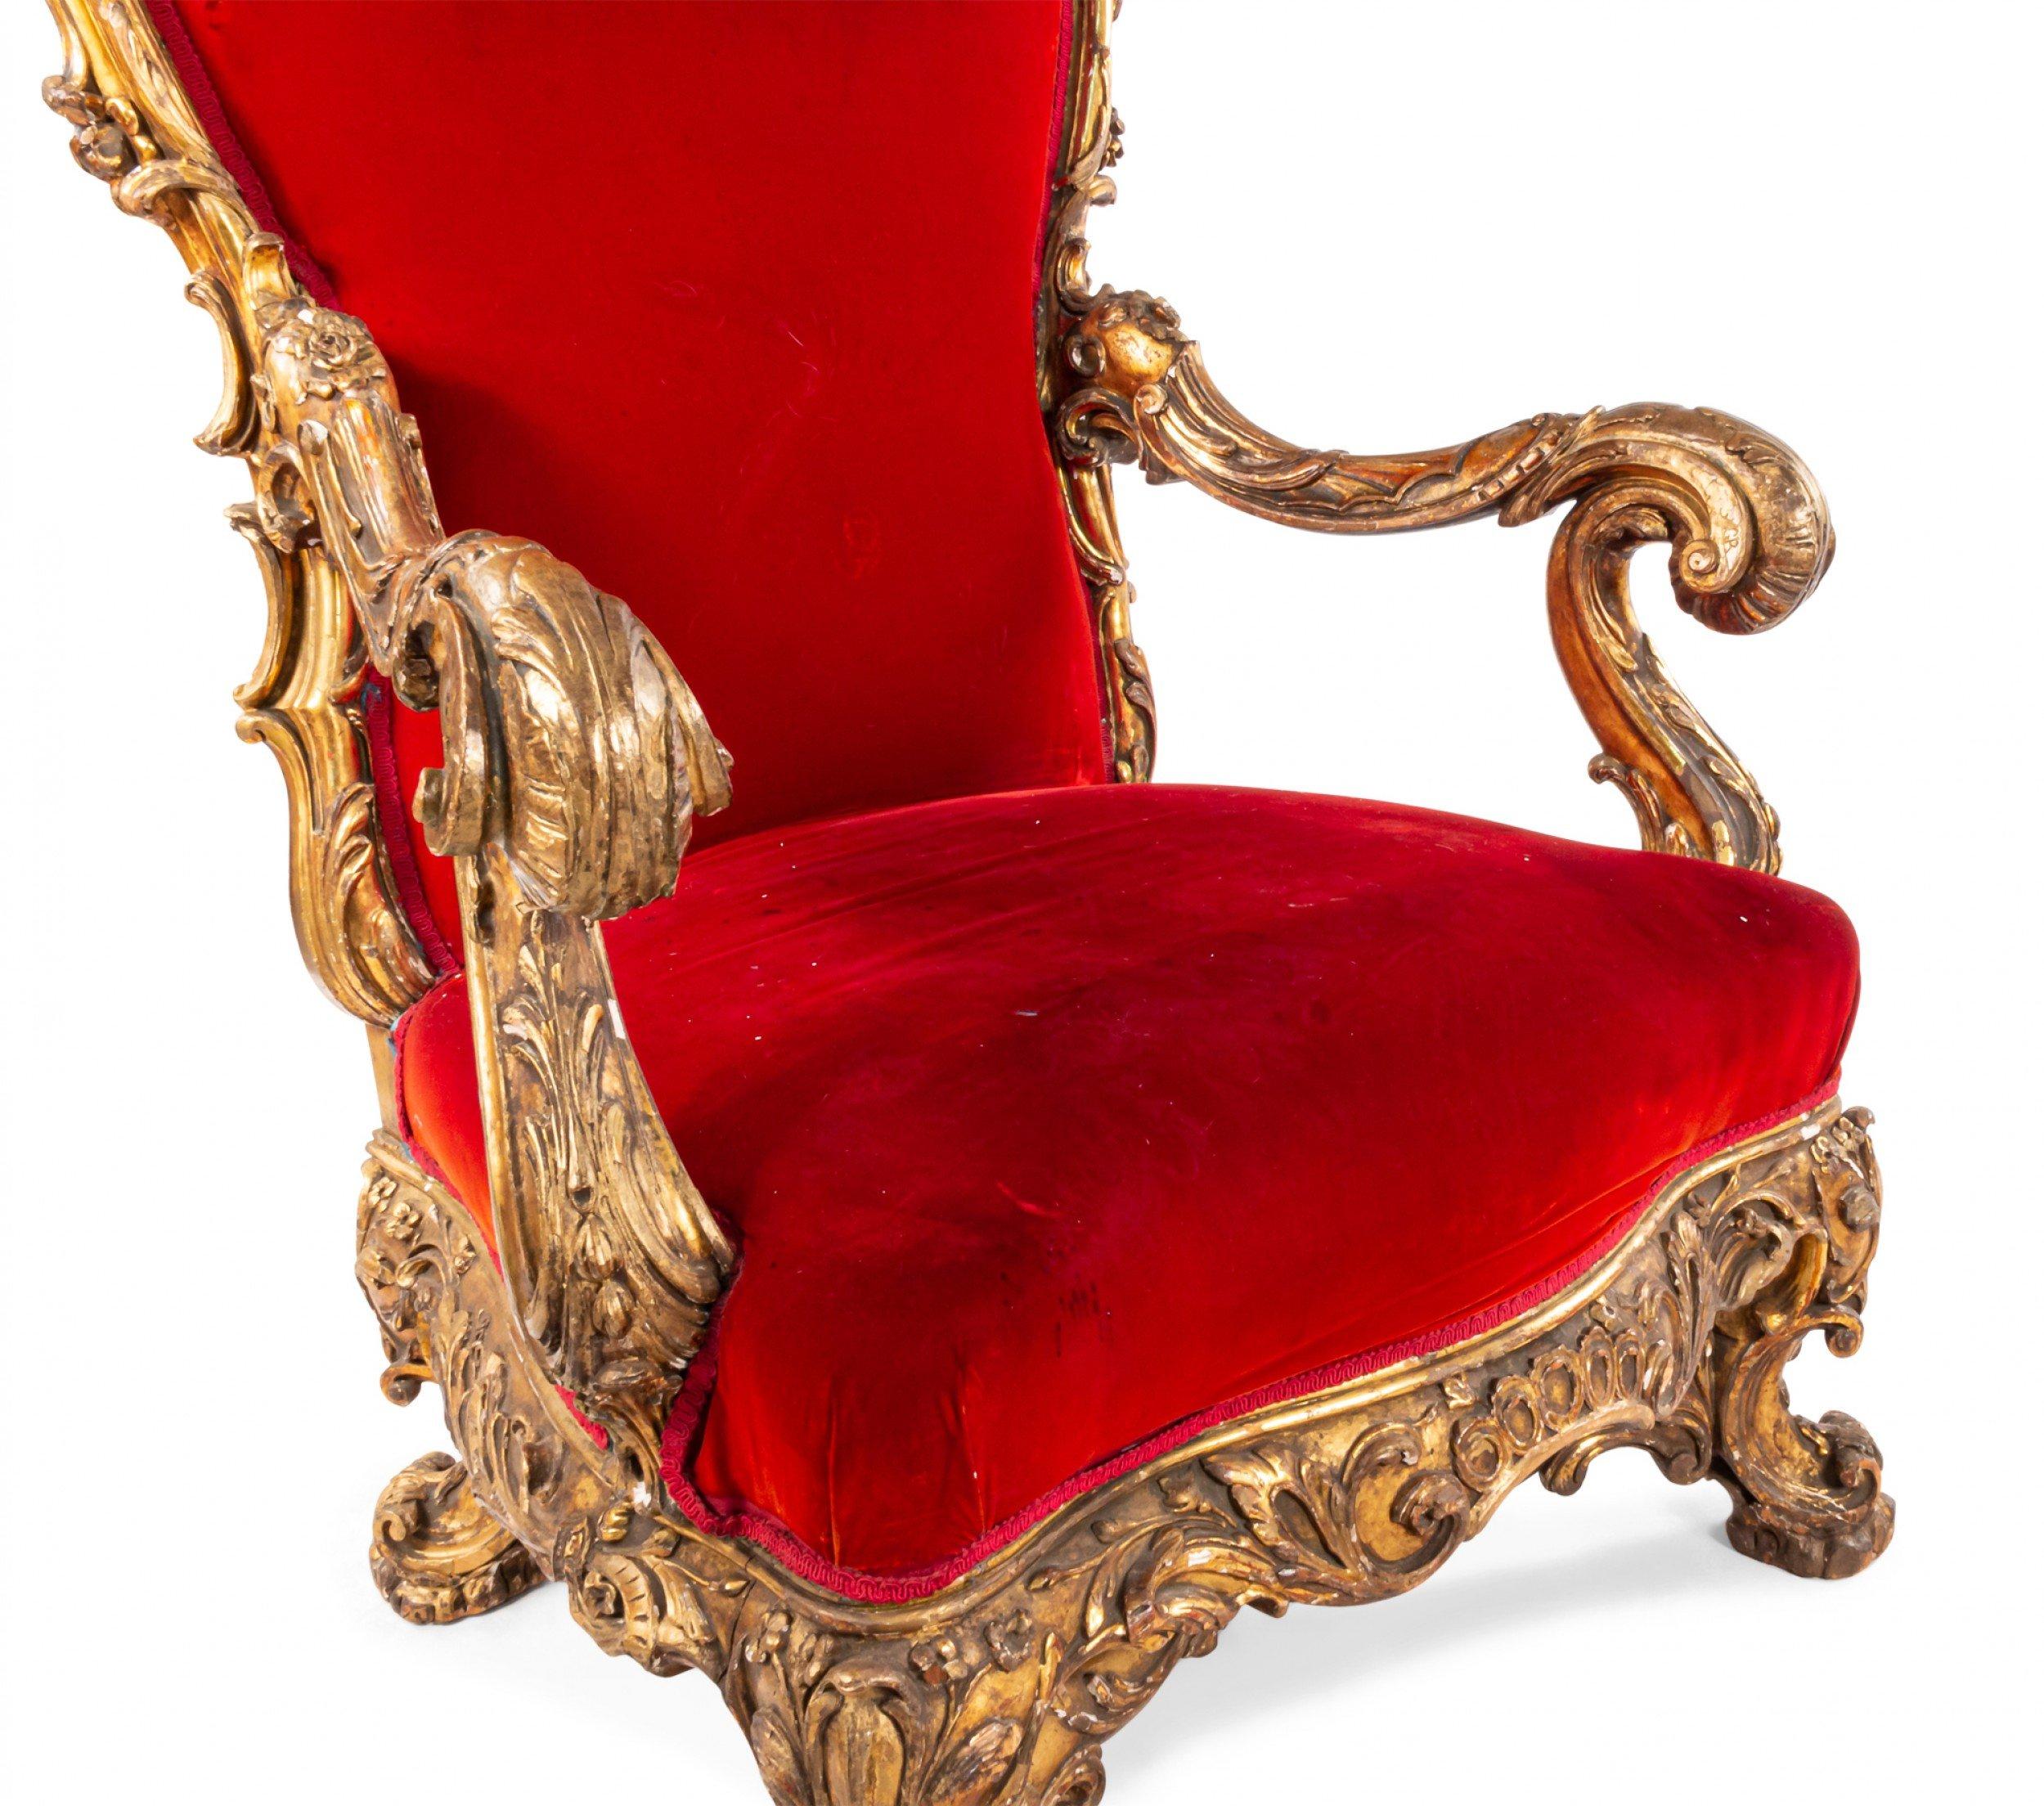 French Regence style (19th Cent) gilt throne chair with carved back crest and stretcher with red velvet upholstery
